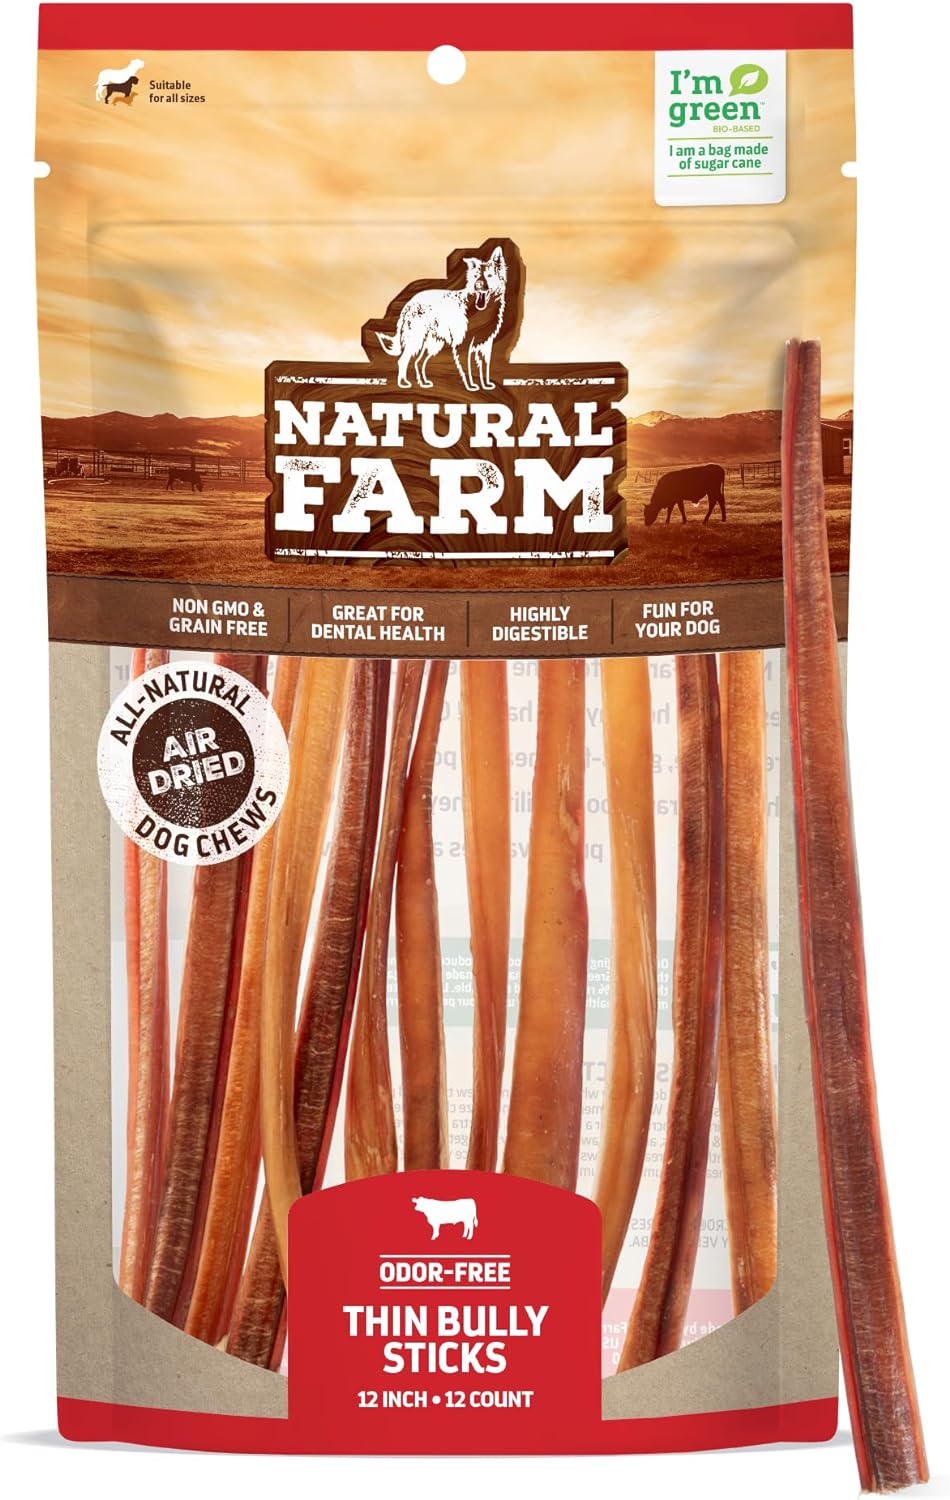 Natural Farm Odor-Free Thin Bully Sticks (12”, 12-Pack) All-Natural Long-Lasting Dog Chews, 100% Beef Pizzle, Grass-Fed, Grain-Free, Protein for Muscle Development & Energy, Perfect for Large Dogs